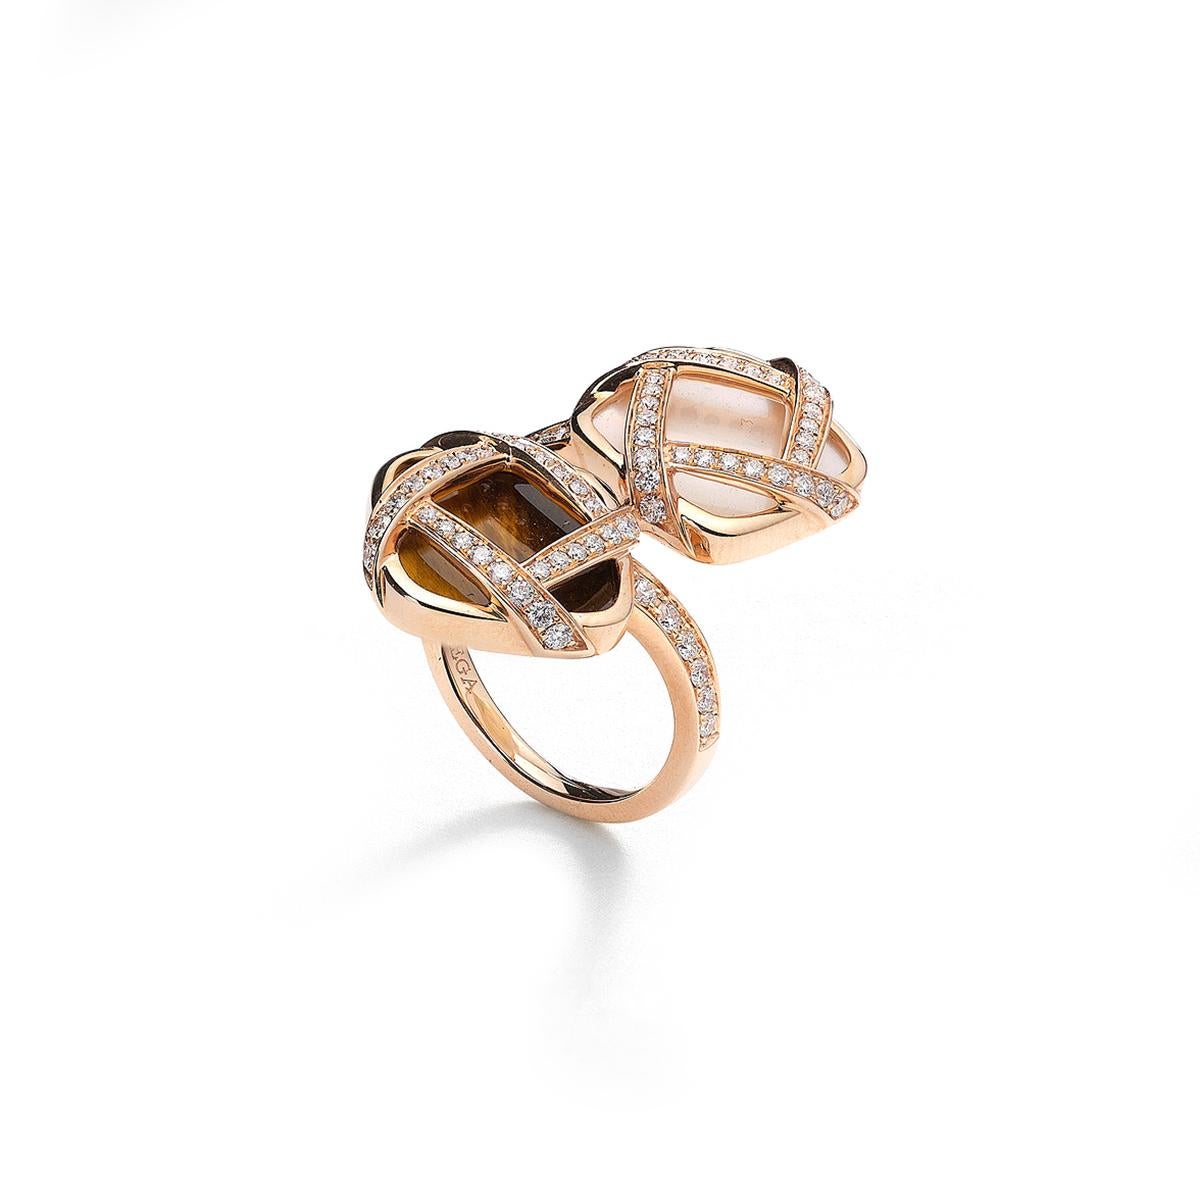 Ring pink gold 18K set with 76 diamonds 0.86 cts, one mother of pearl 3.41 cts and one tiger eye 3.29 cts.               